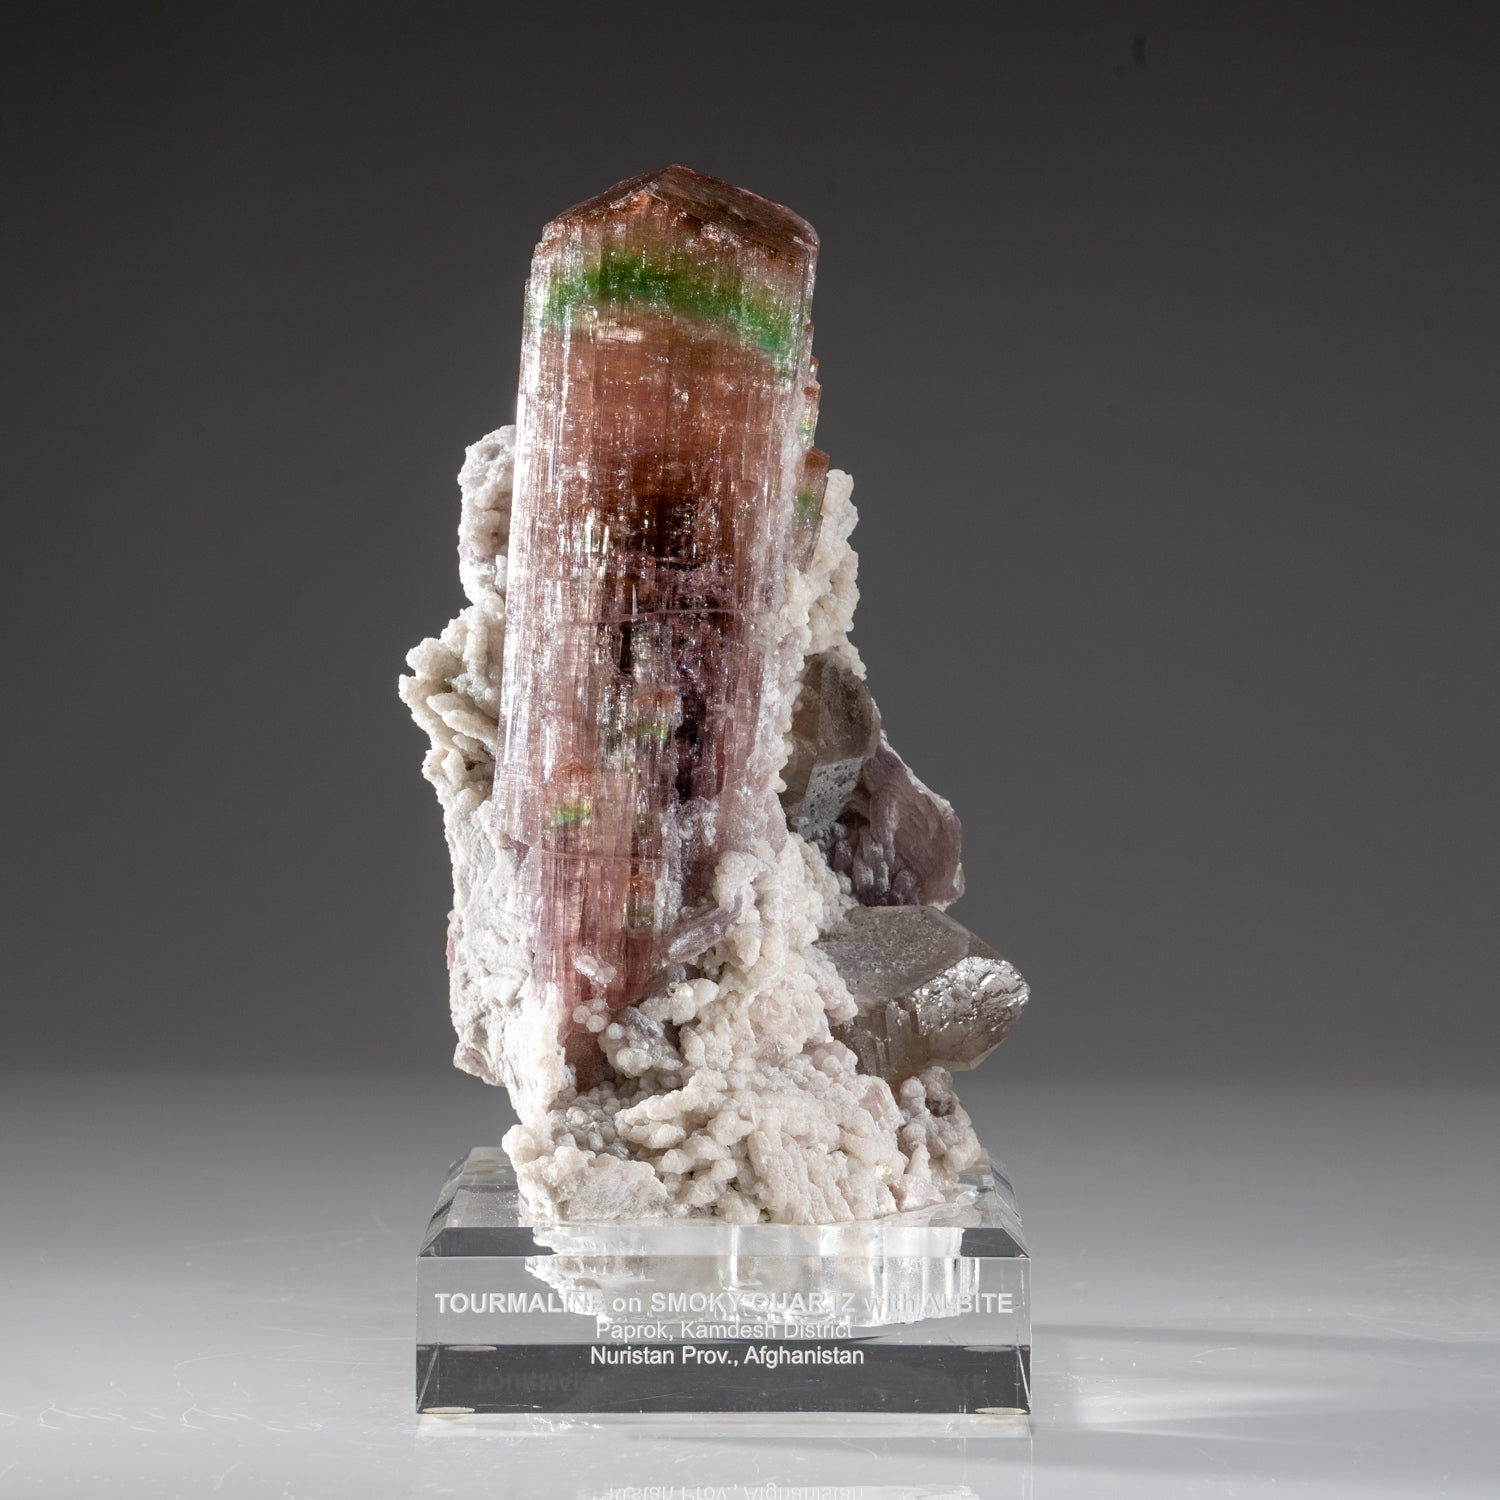 Waterlemon Tourmaline with Smoky Quartz and Albite from Nuristan Province, Afghanistan